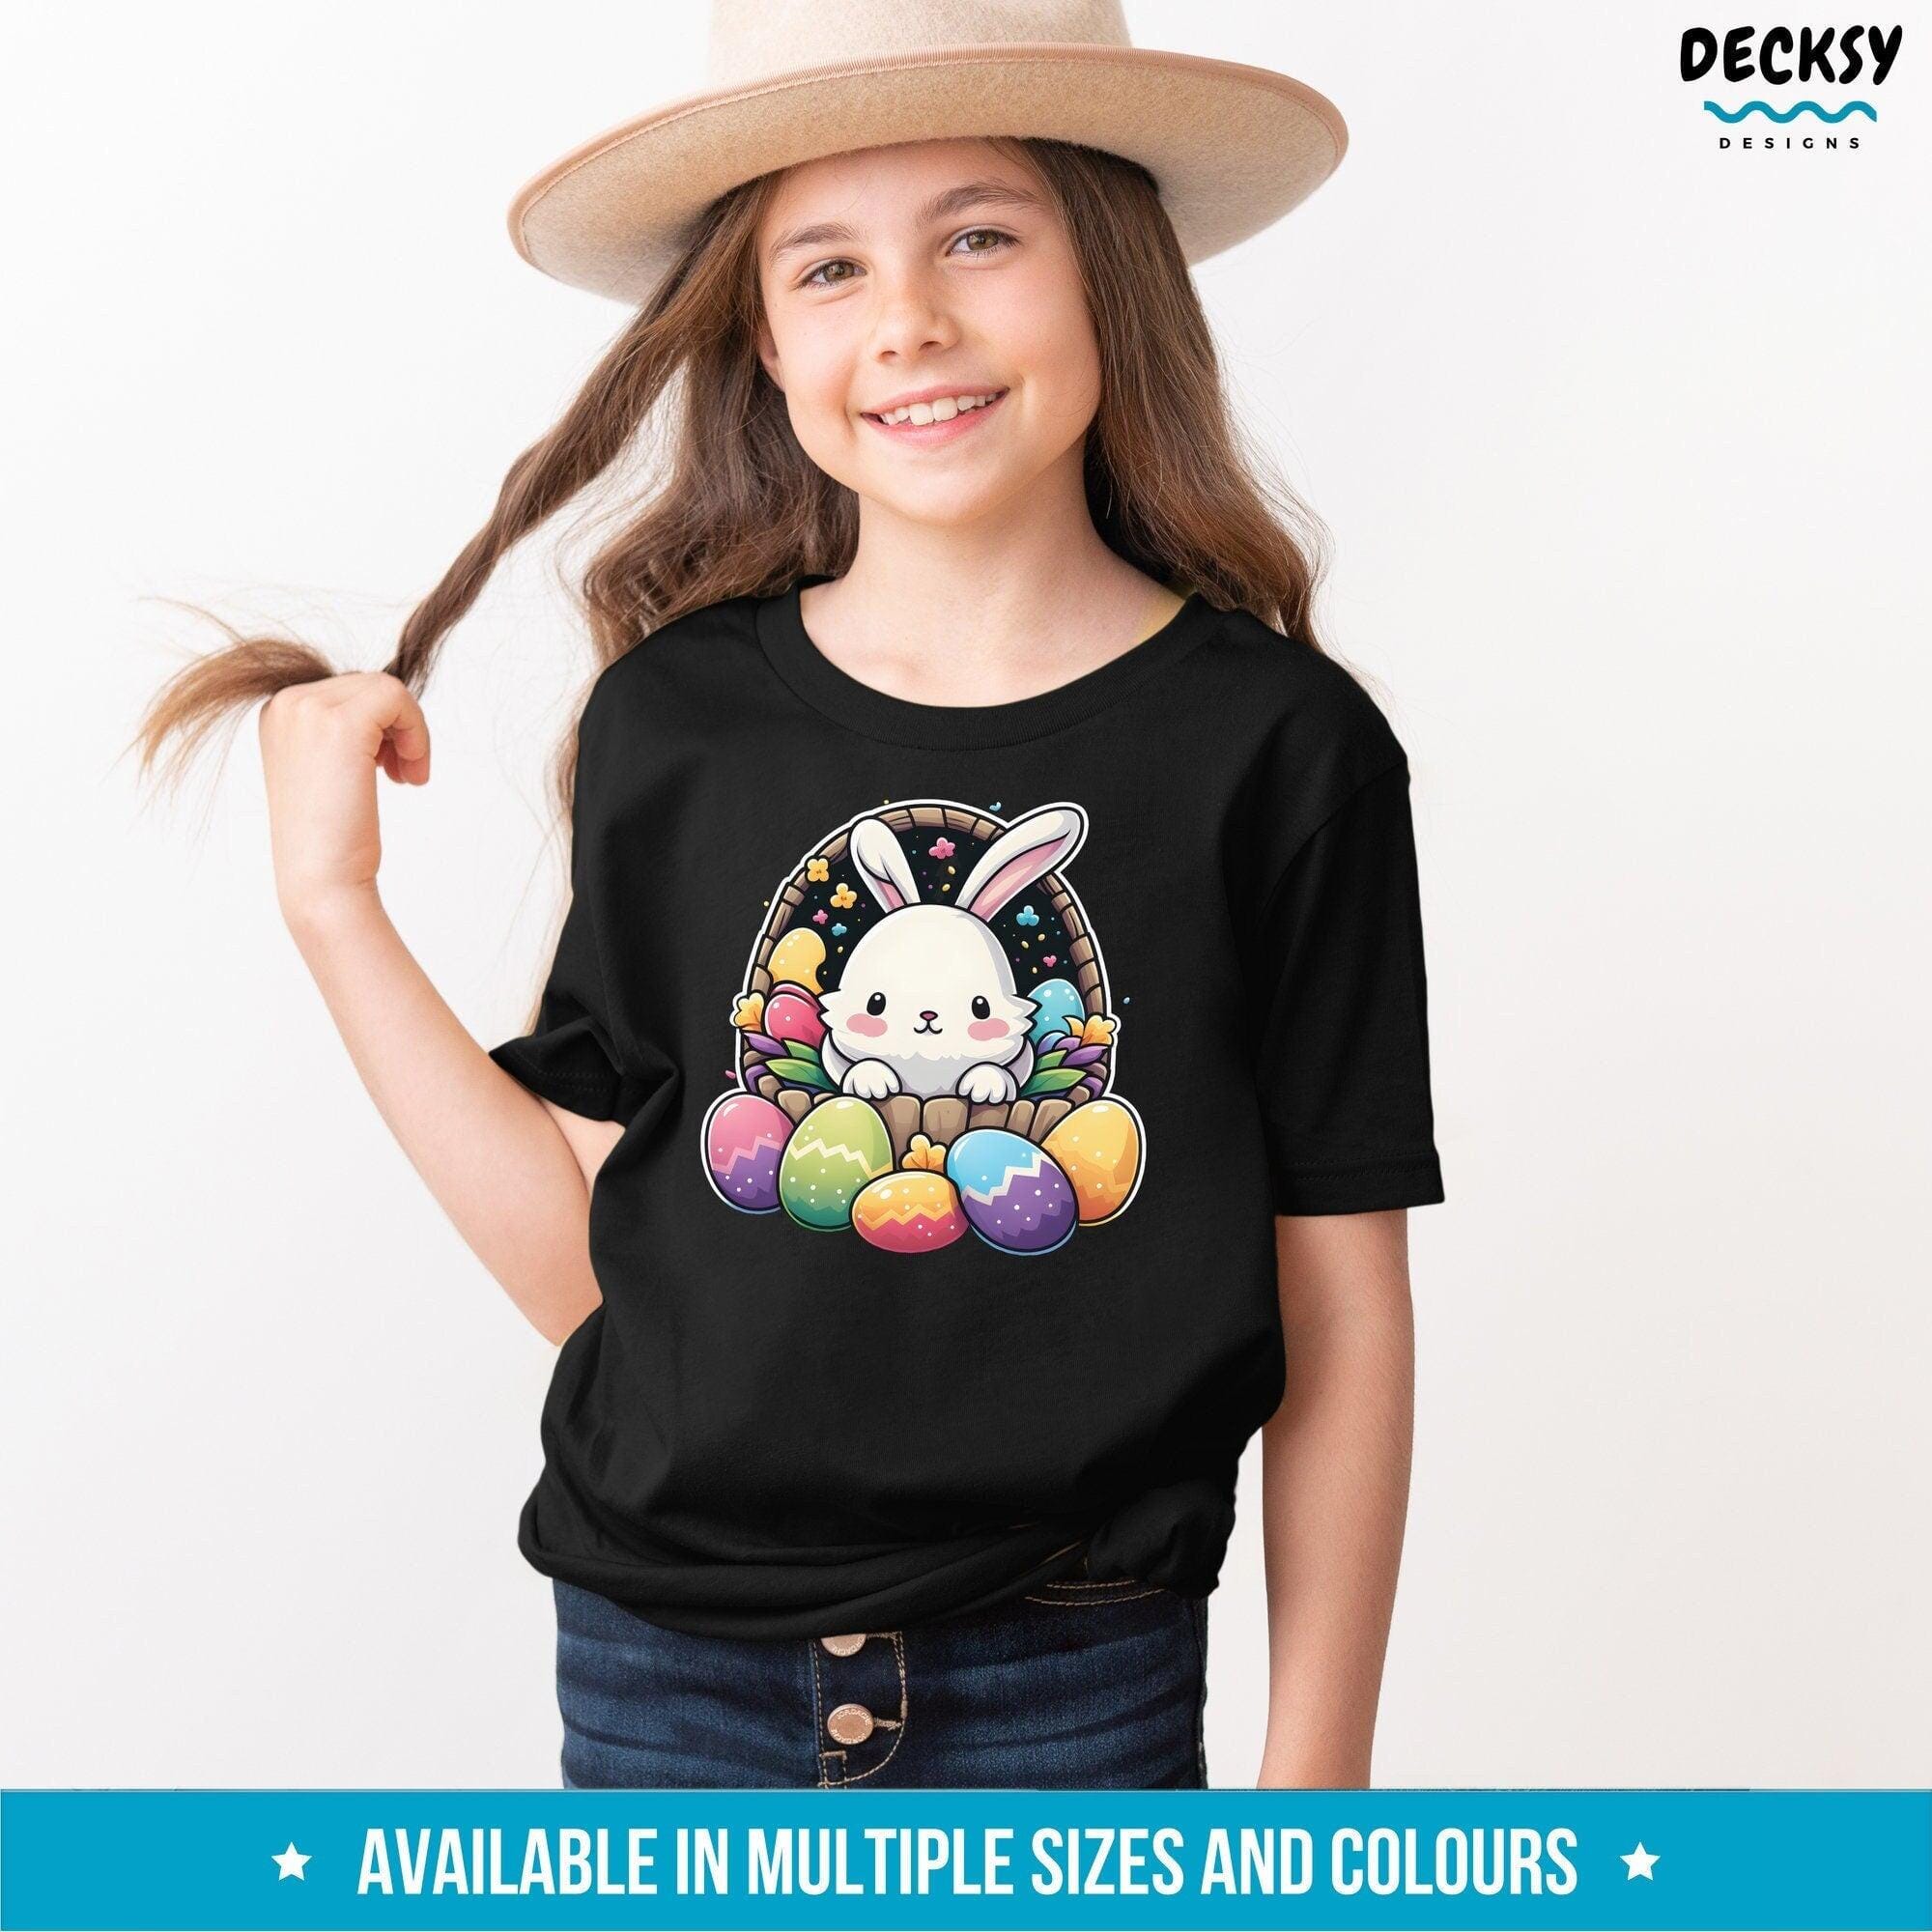 Easter Bunny Shirt, Kids Easter Gift-Clothing:Gender-Neutral Adult Clothing:Tops & Tees:T-shirts:Graphic Tees-DecksyDesigns